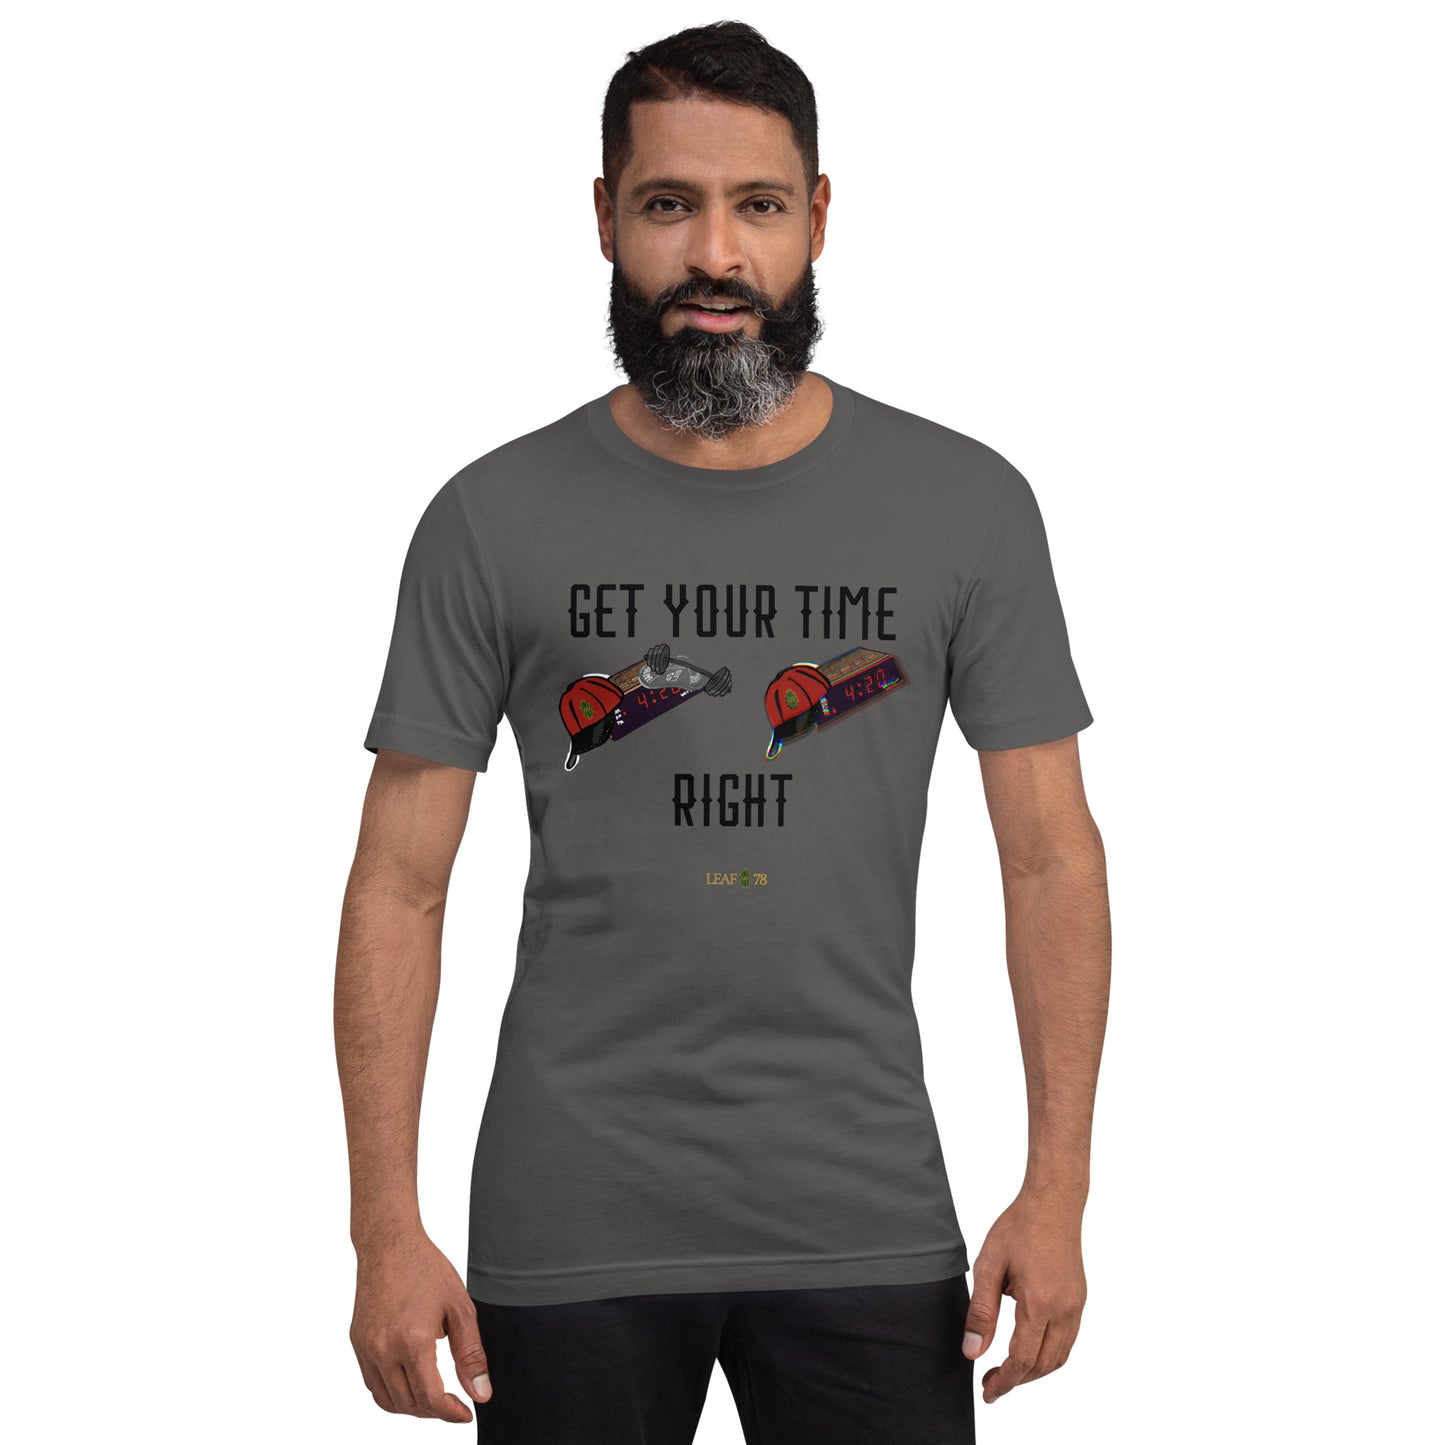 Get Your Time Right t-shirt